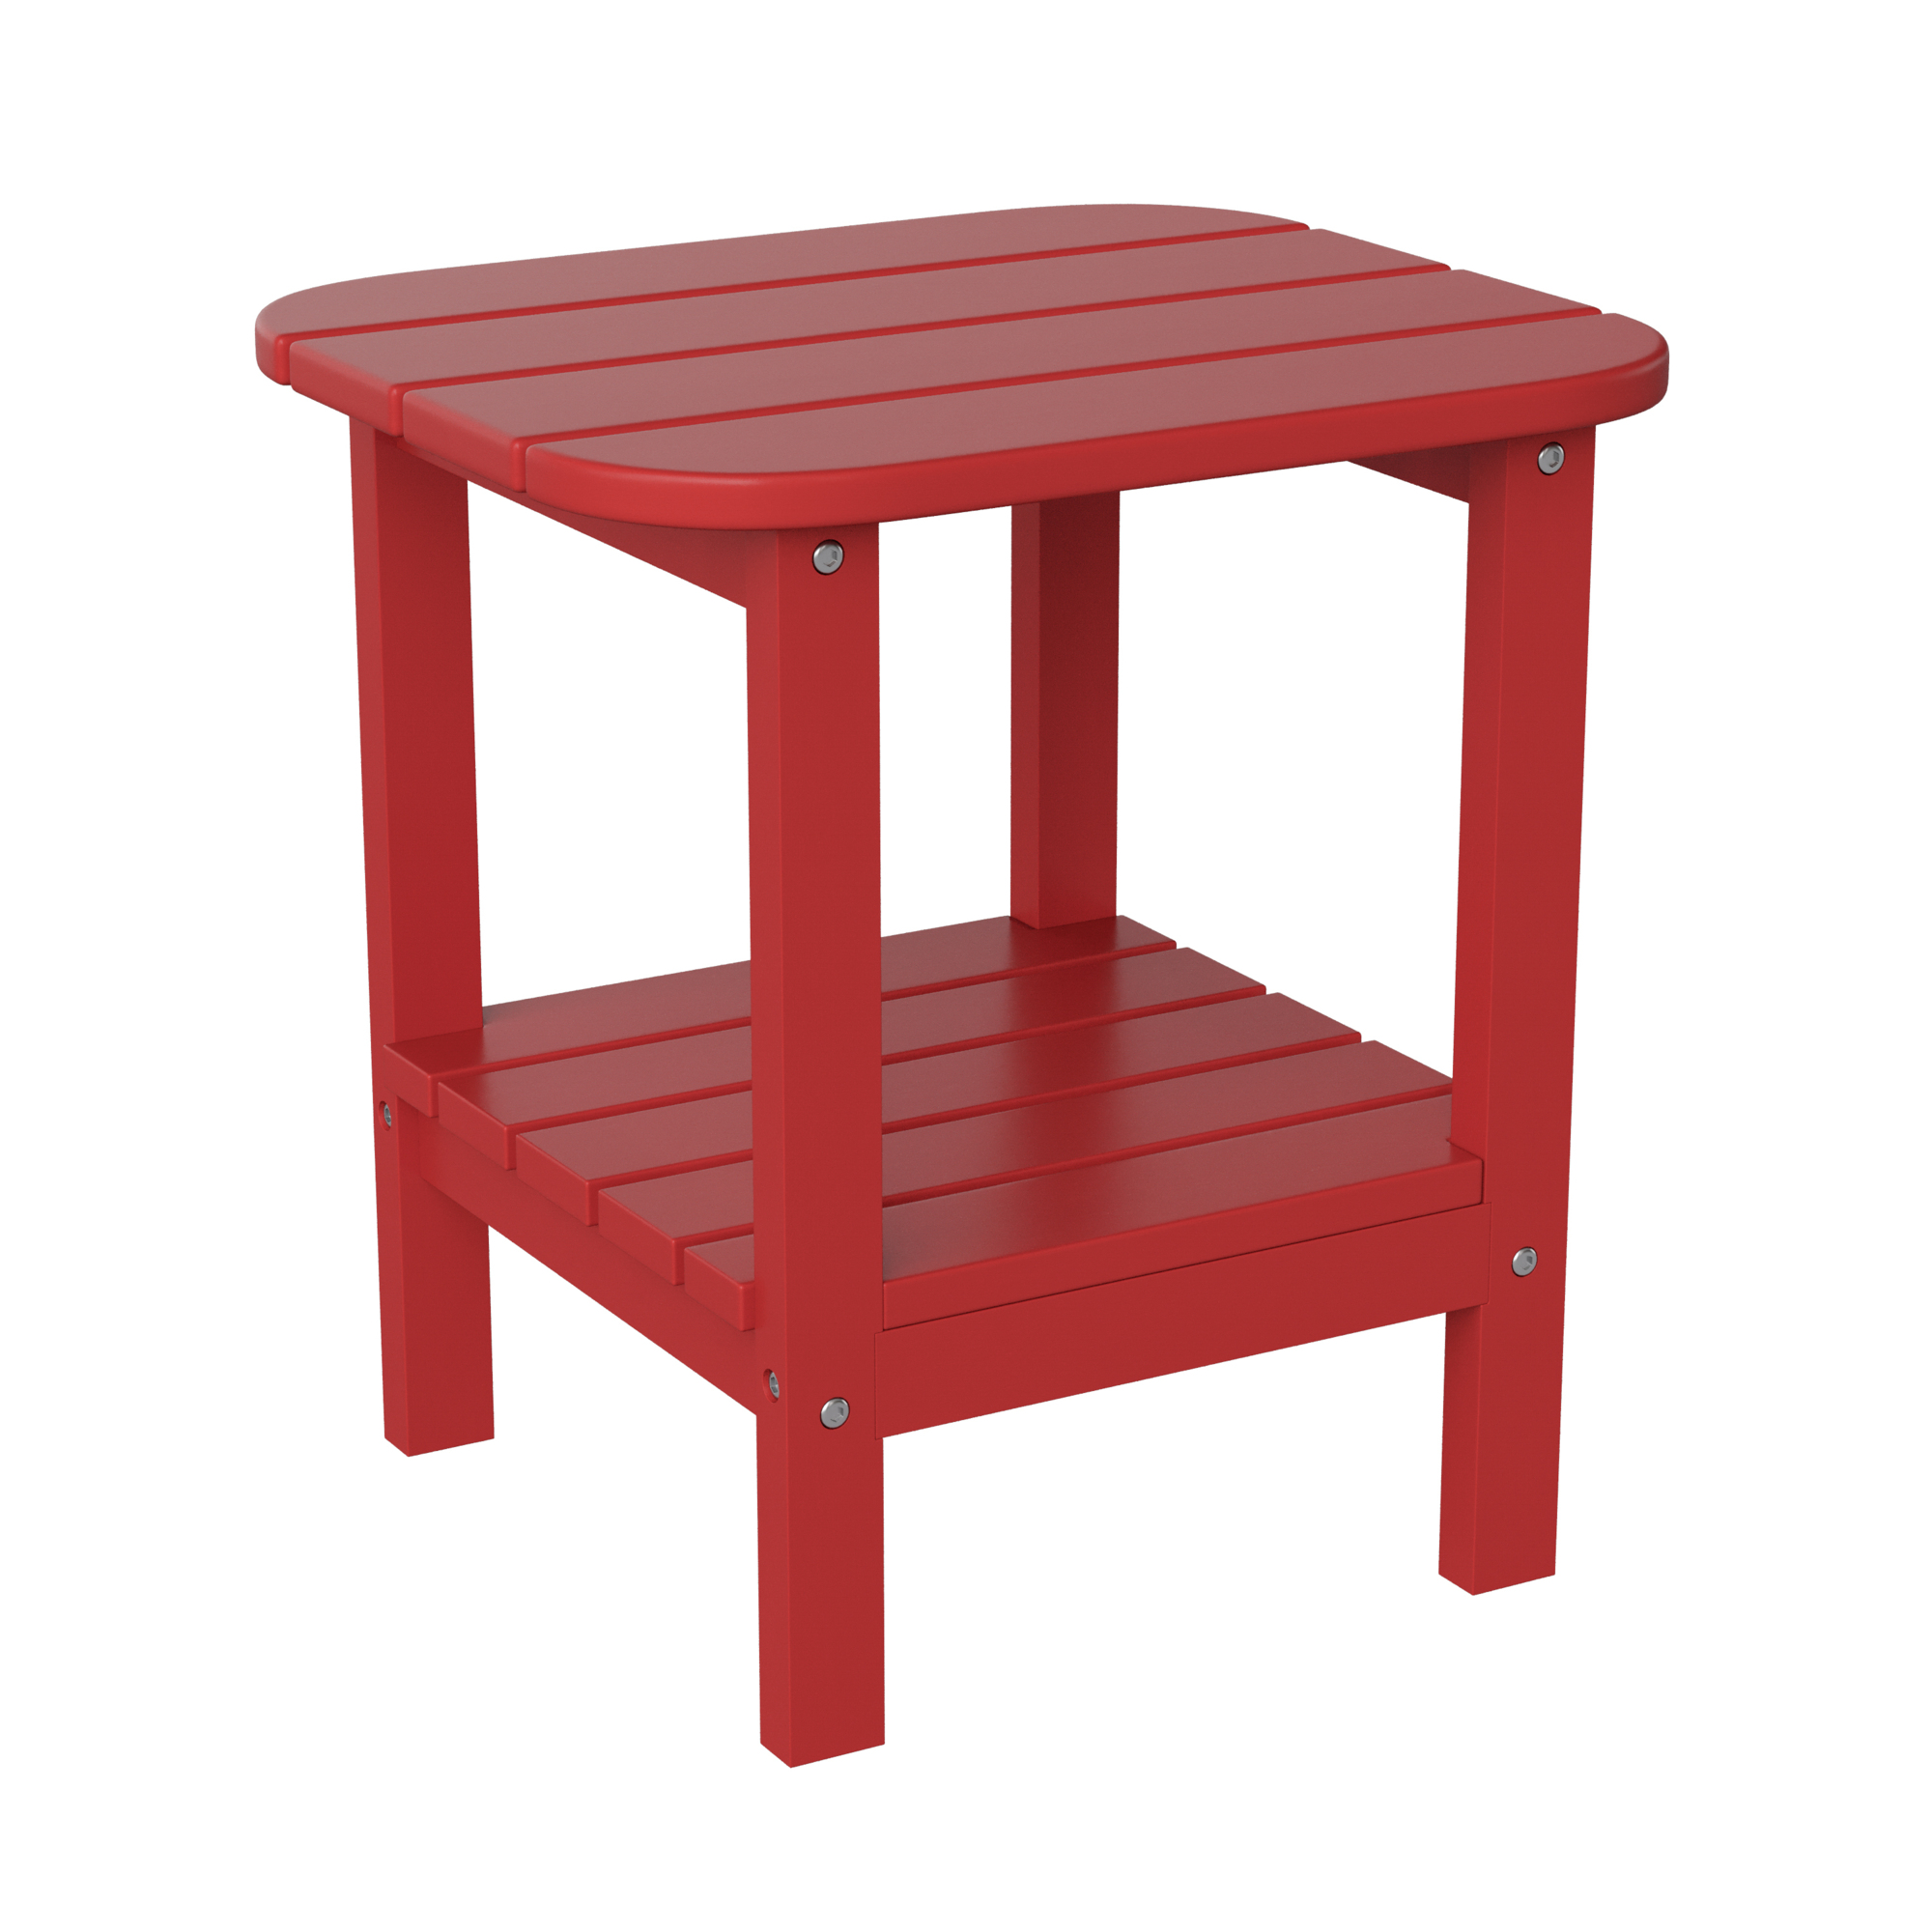 Flash Furniture, Red 2 Tier Adirondack Style Patio Side Table, Table Shape Rectangle, Primary Color Red, Height 17.75 in, Model LEHMP1351517HRD